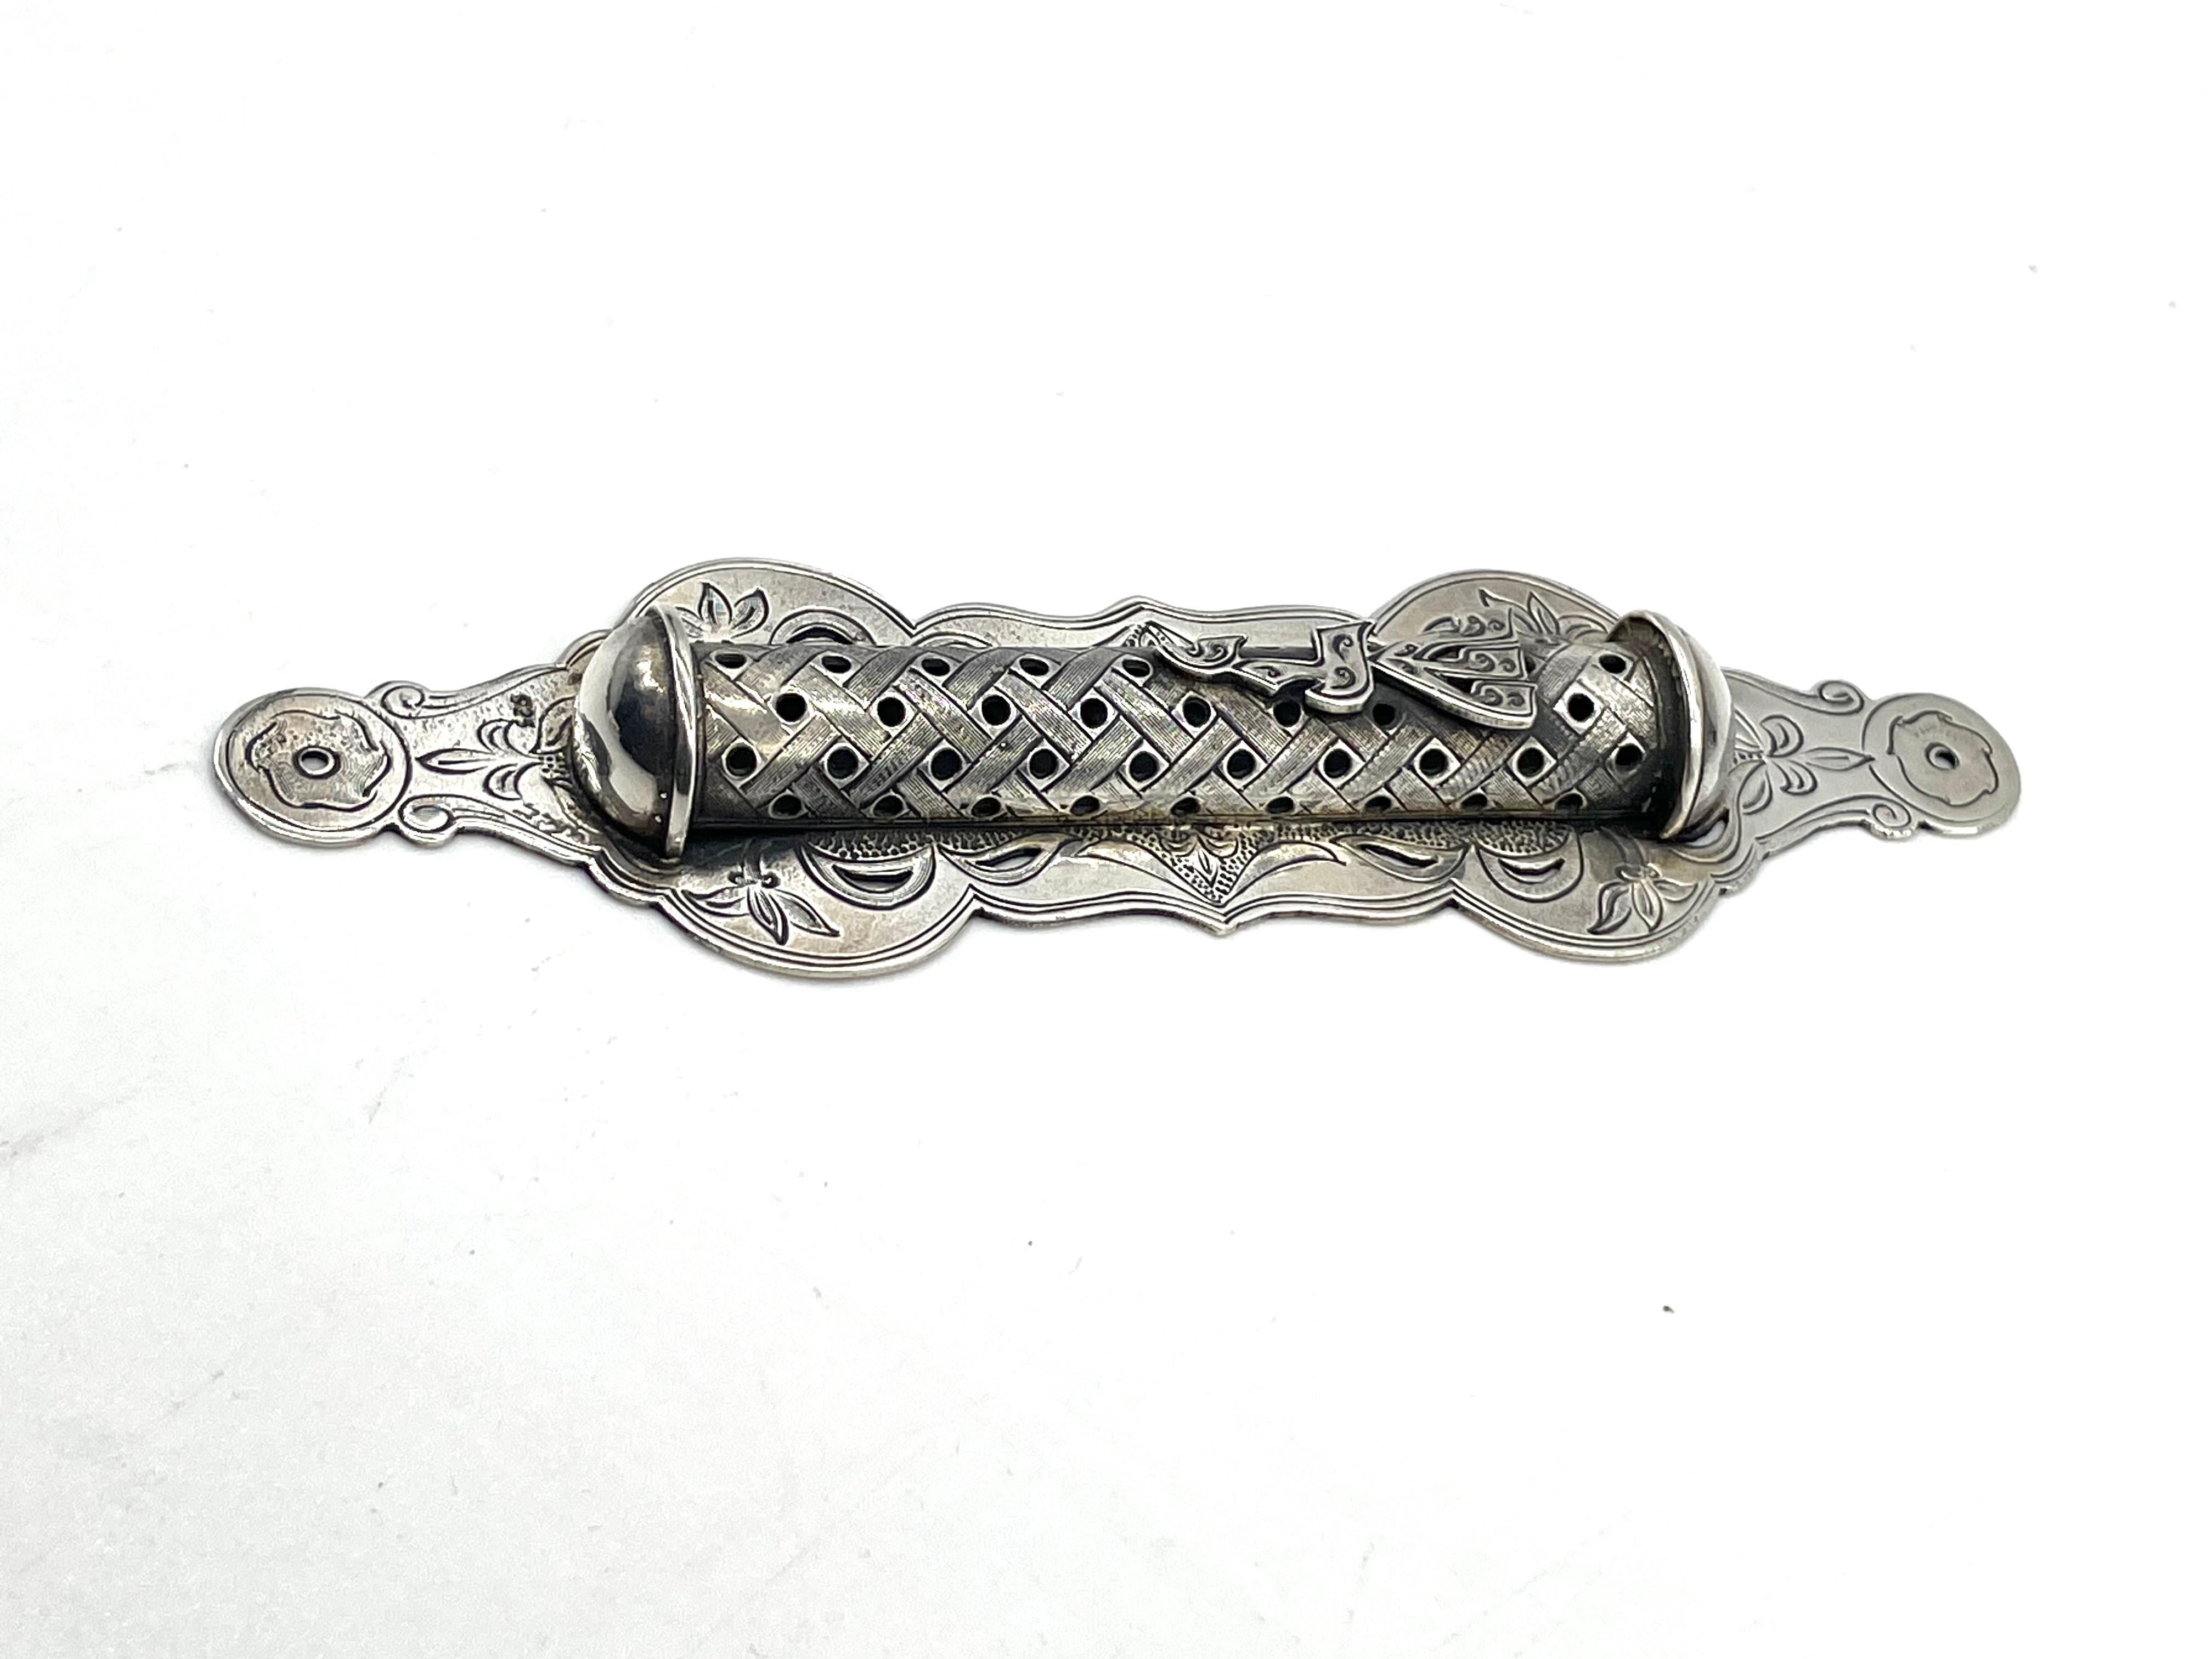 Late 20th century silver Mezuzah case handmade by the artist Shuki Freiman. The base of the mezuzah case is adorned with floral engraving throughout, while the cylinder is decorated with geometrical pattern and hollowed circles to reveal the scroll